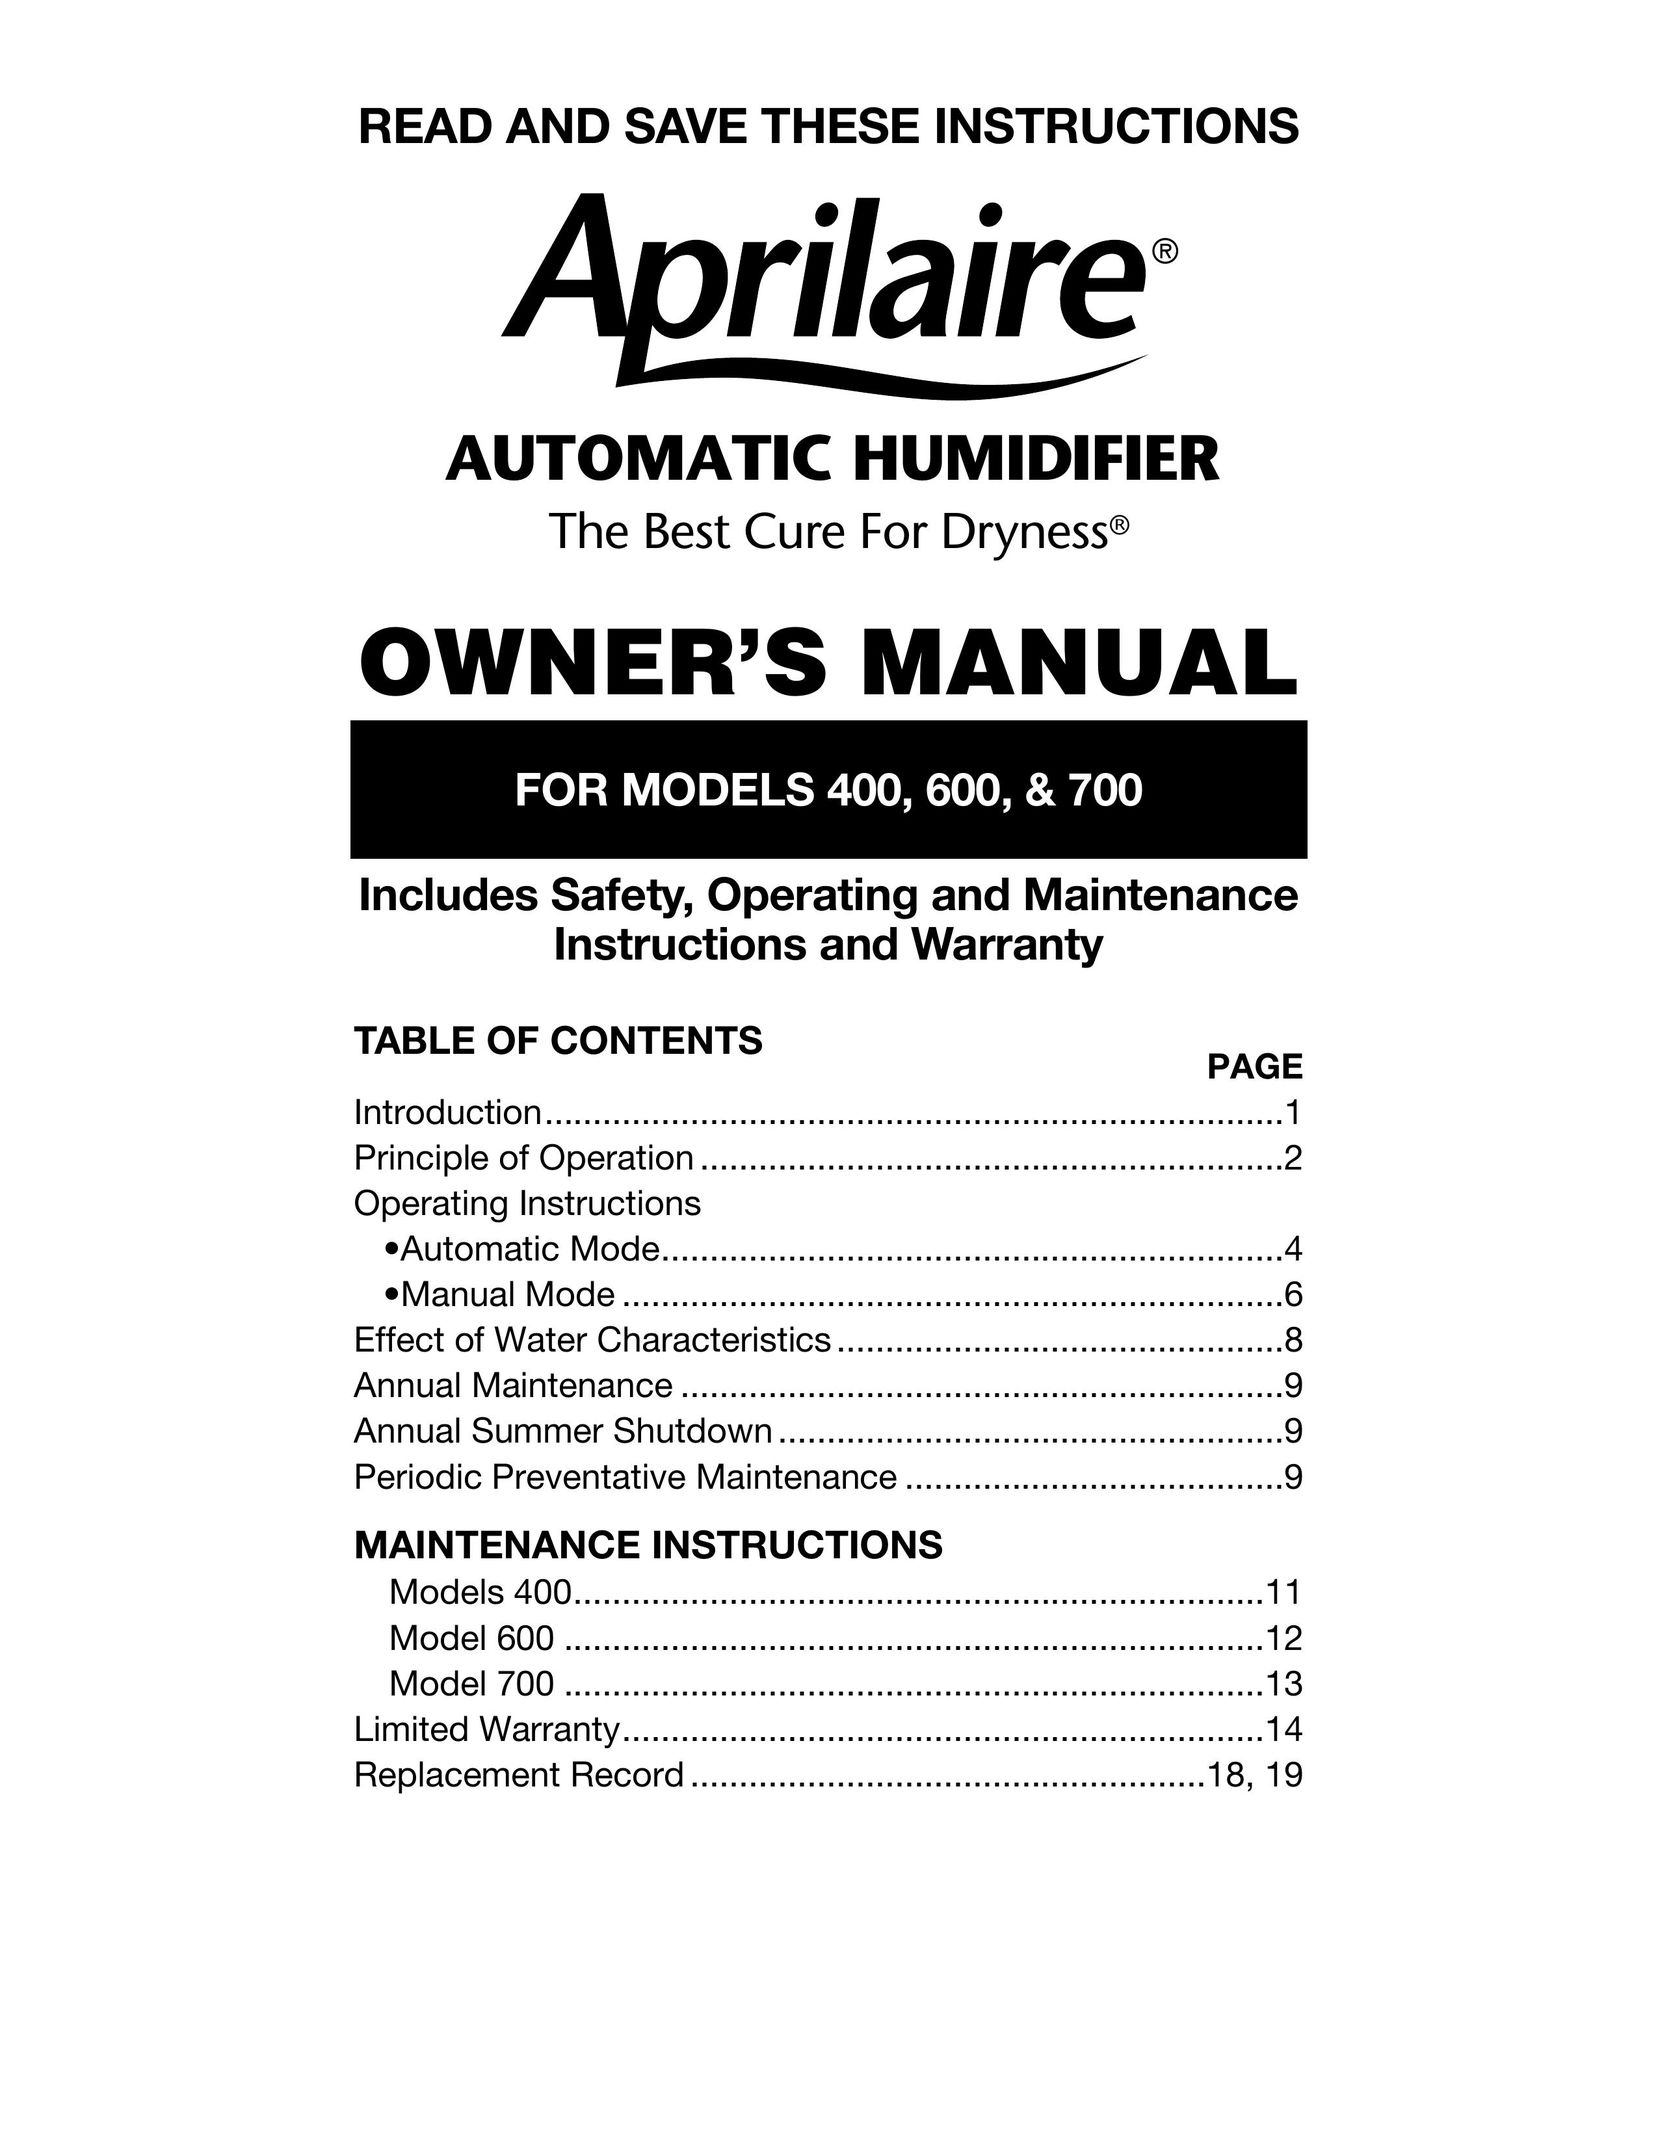 Aprilaire 600 &700 Humidifier User Manual